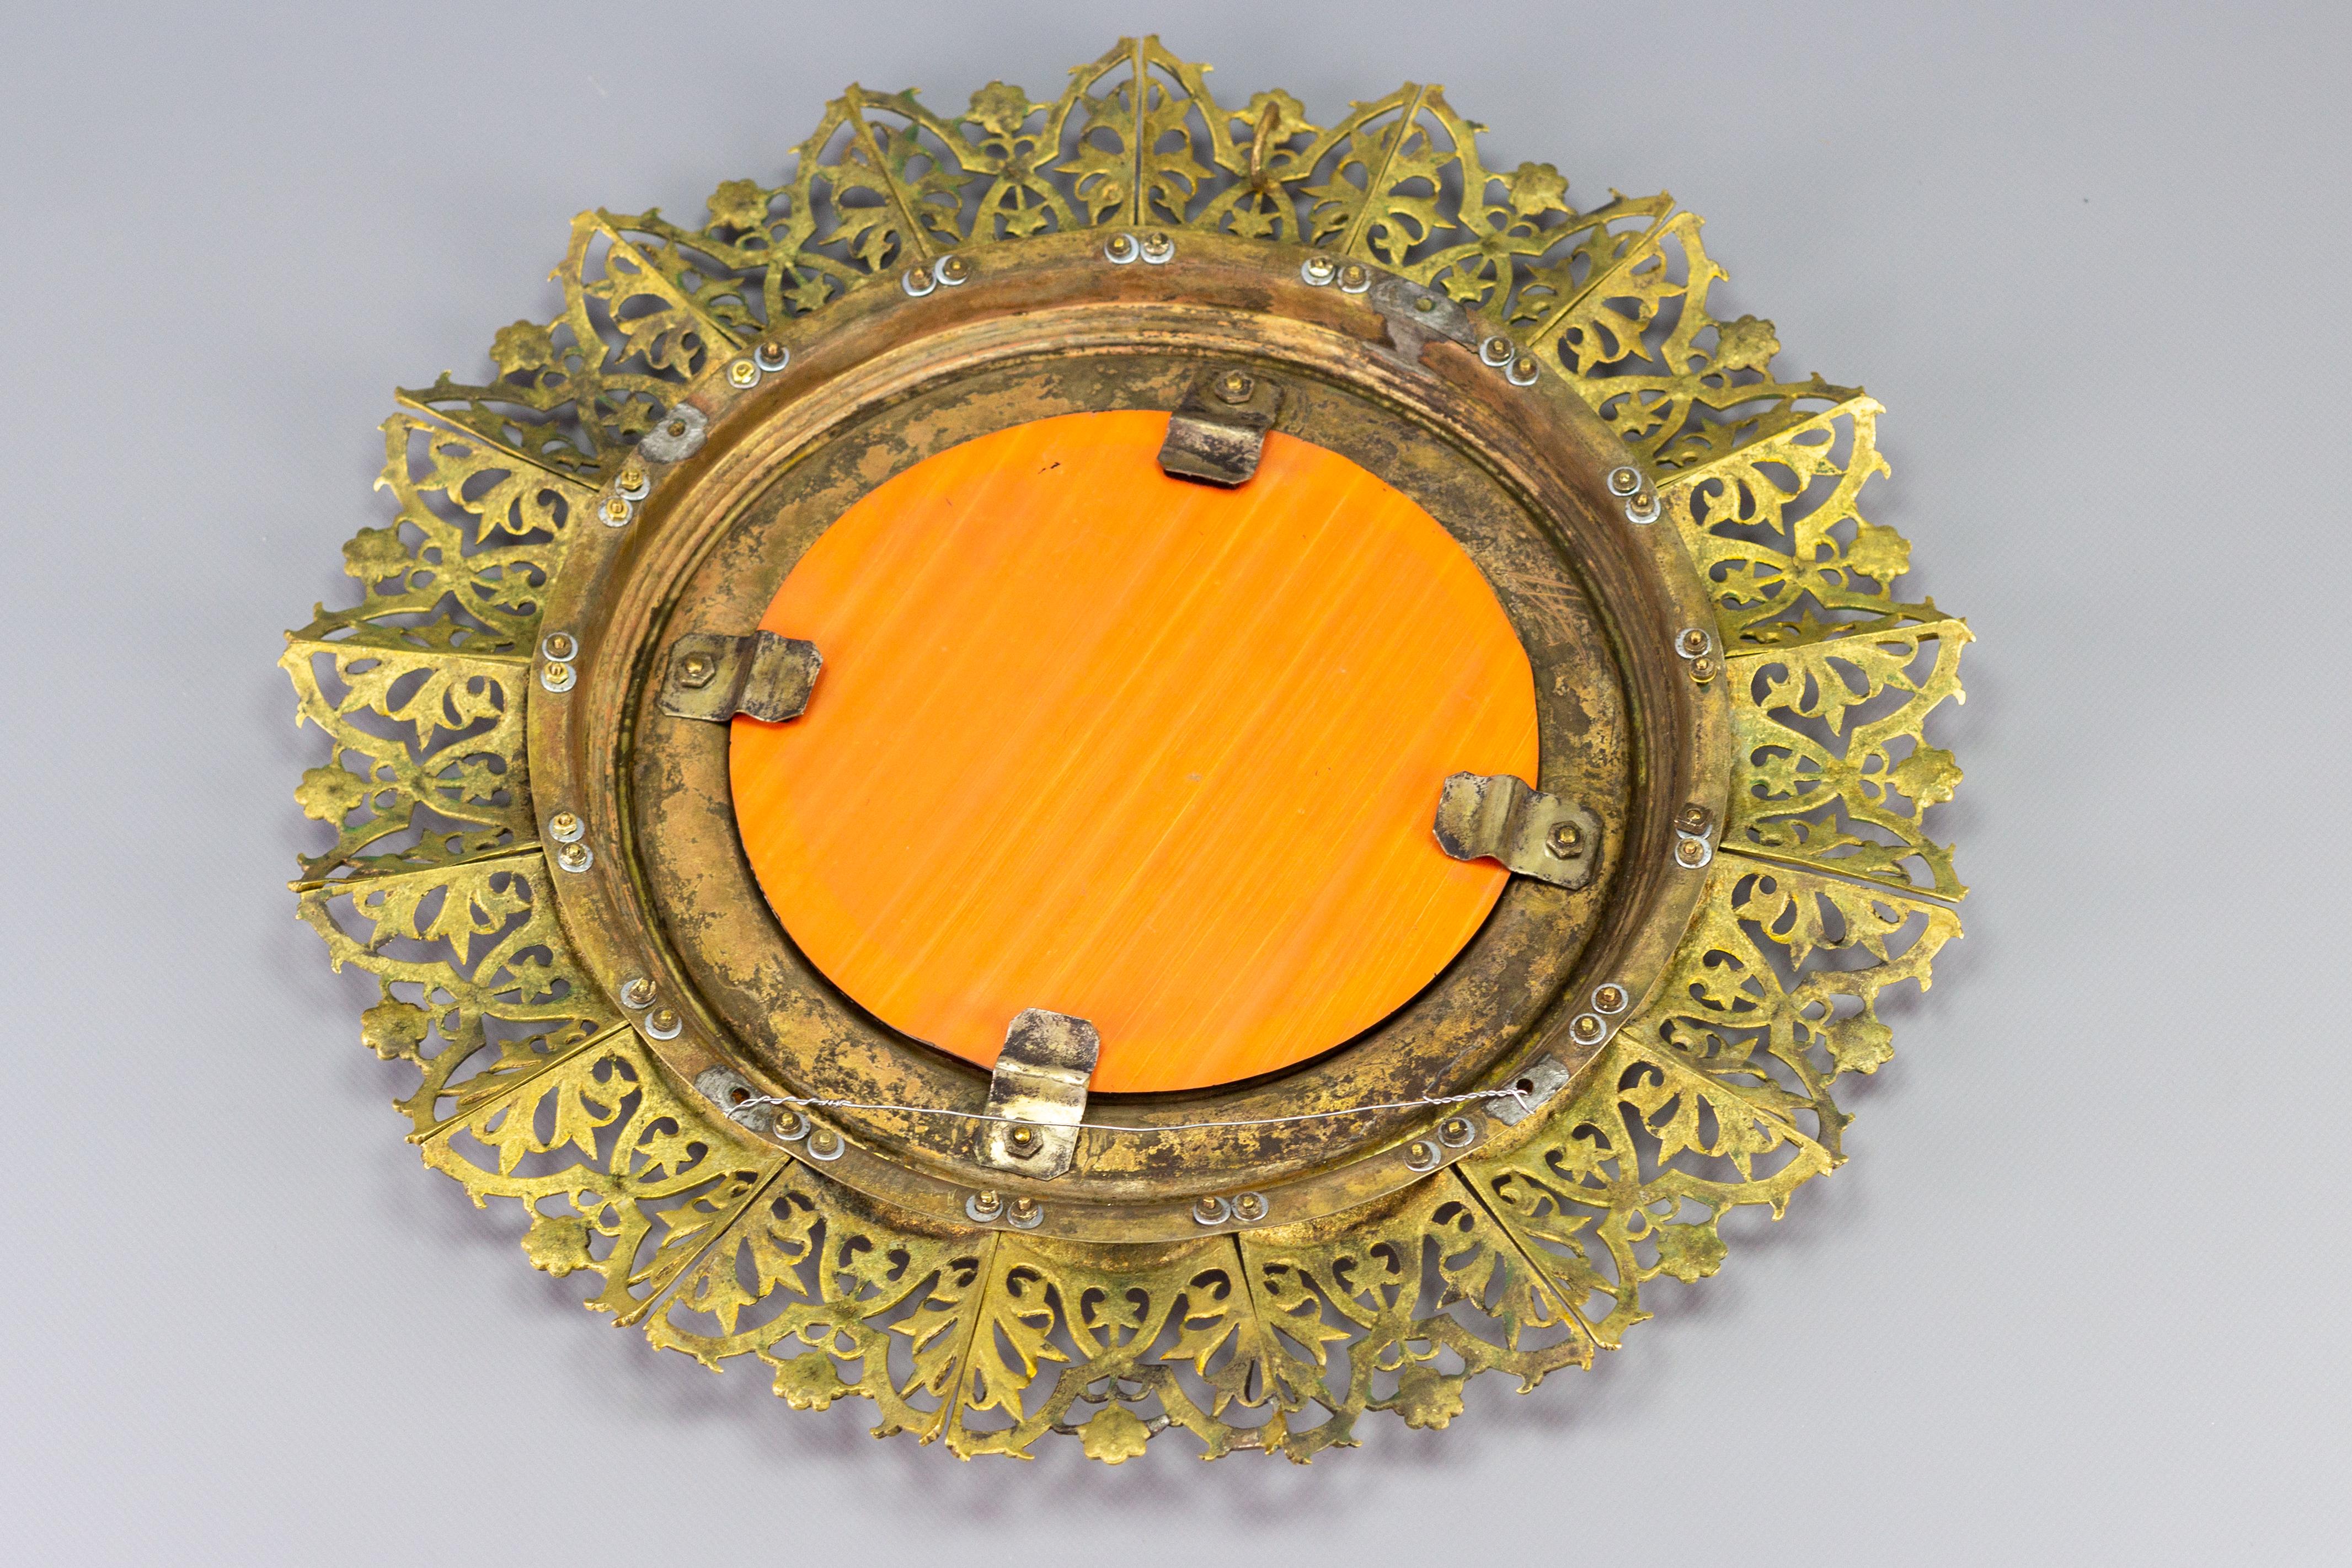 Antique Circular Bronze and Brass Mirror in Sunburst Shape, Early 20th Century For Sale 8